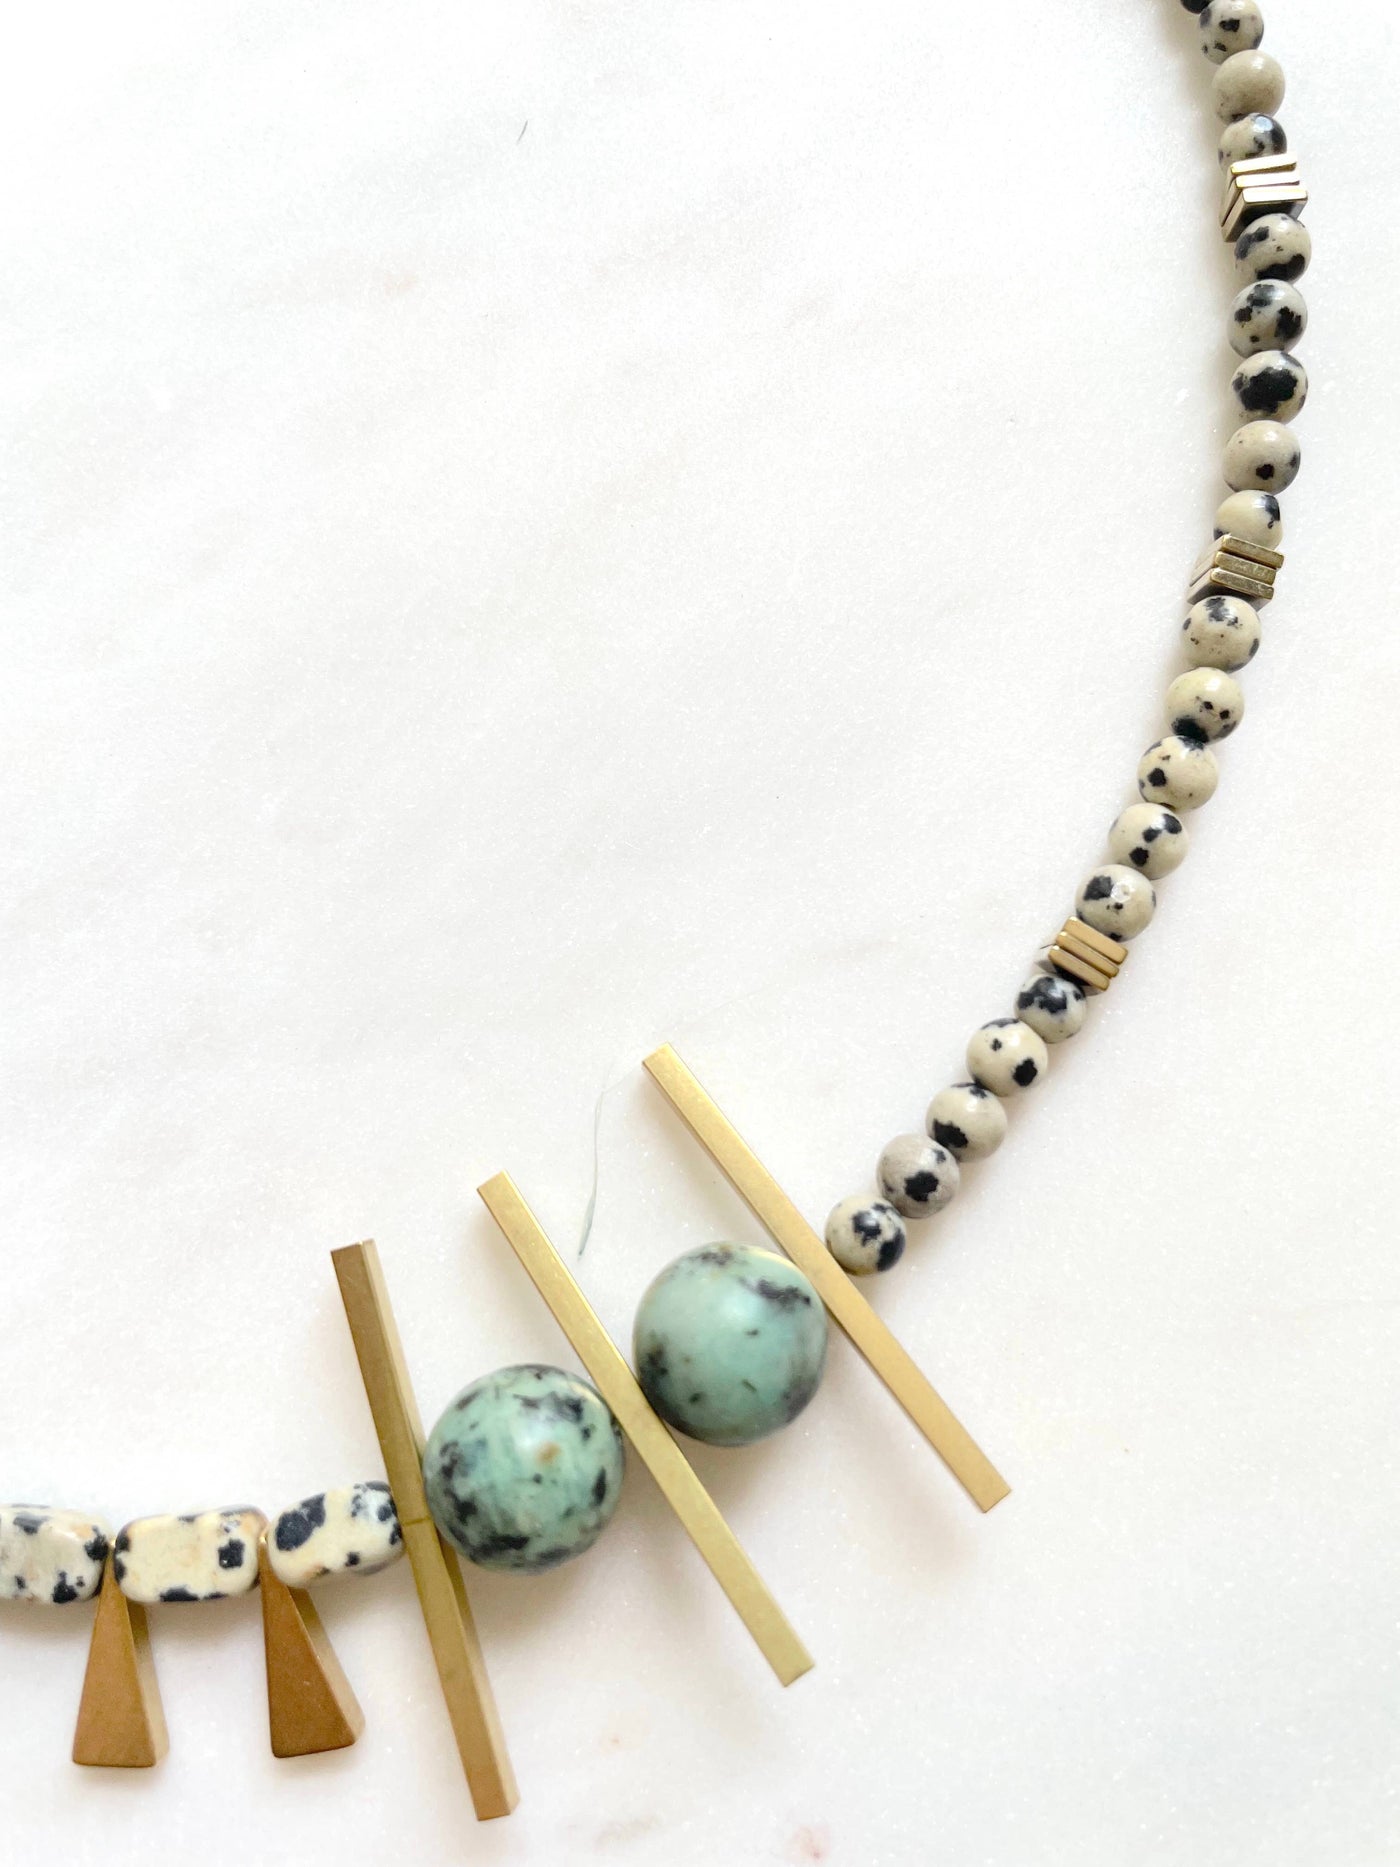 XTRA by Stacey The Anka Necklace - Dalmatian Jasper Gemstone Necklace - Simple Good